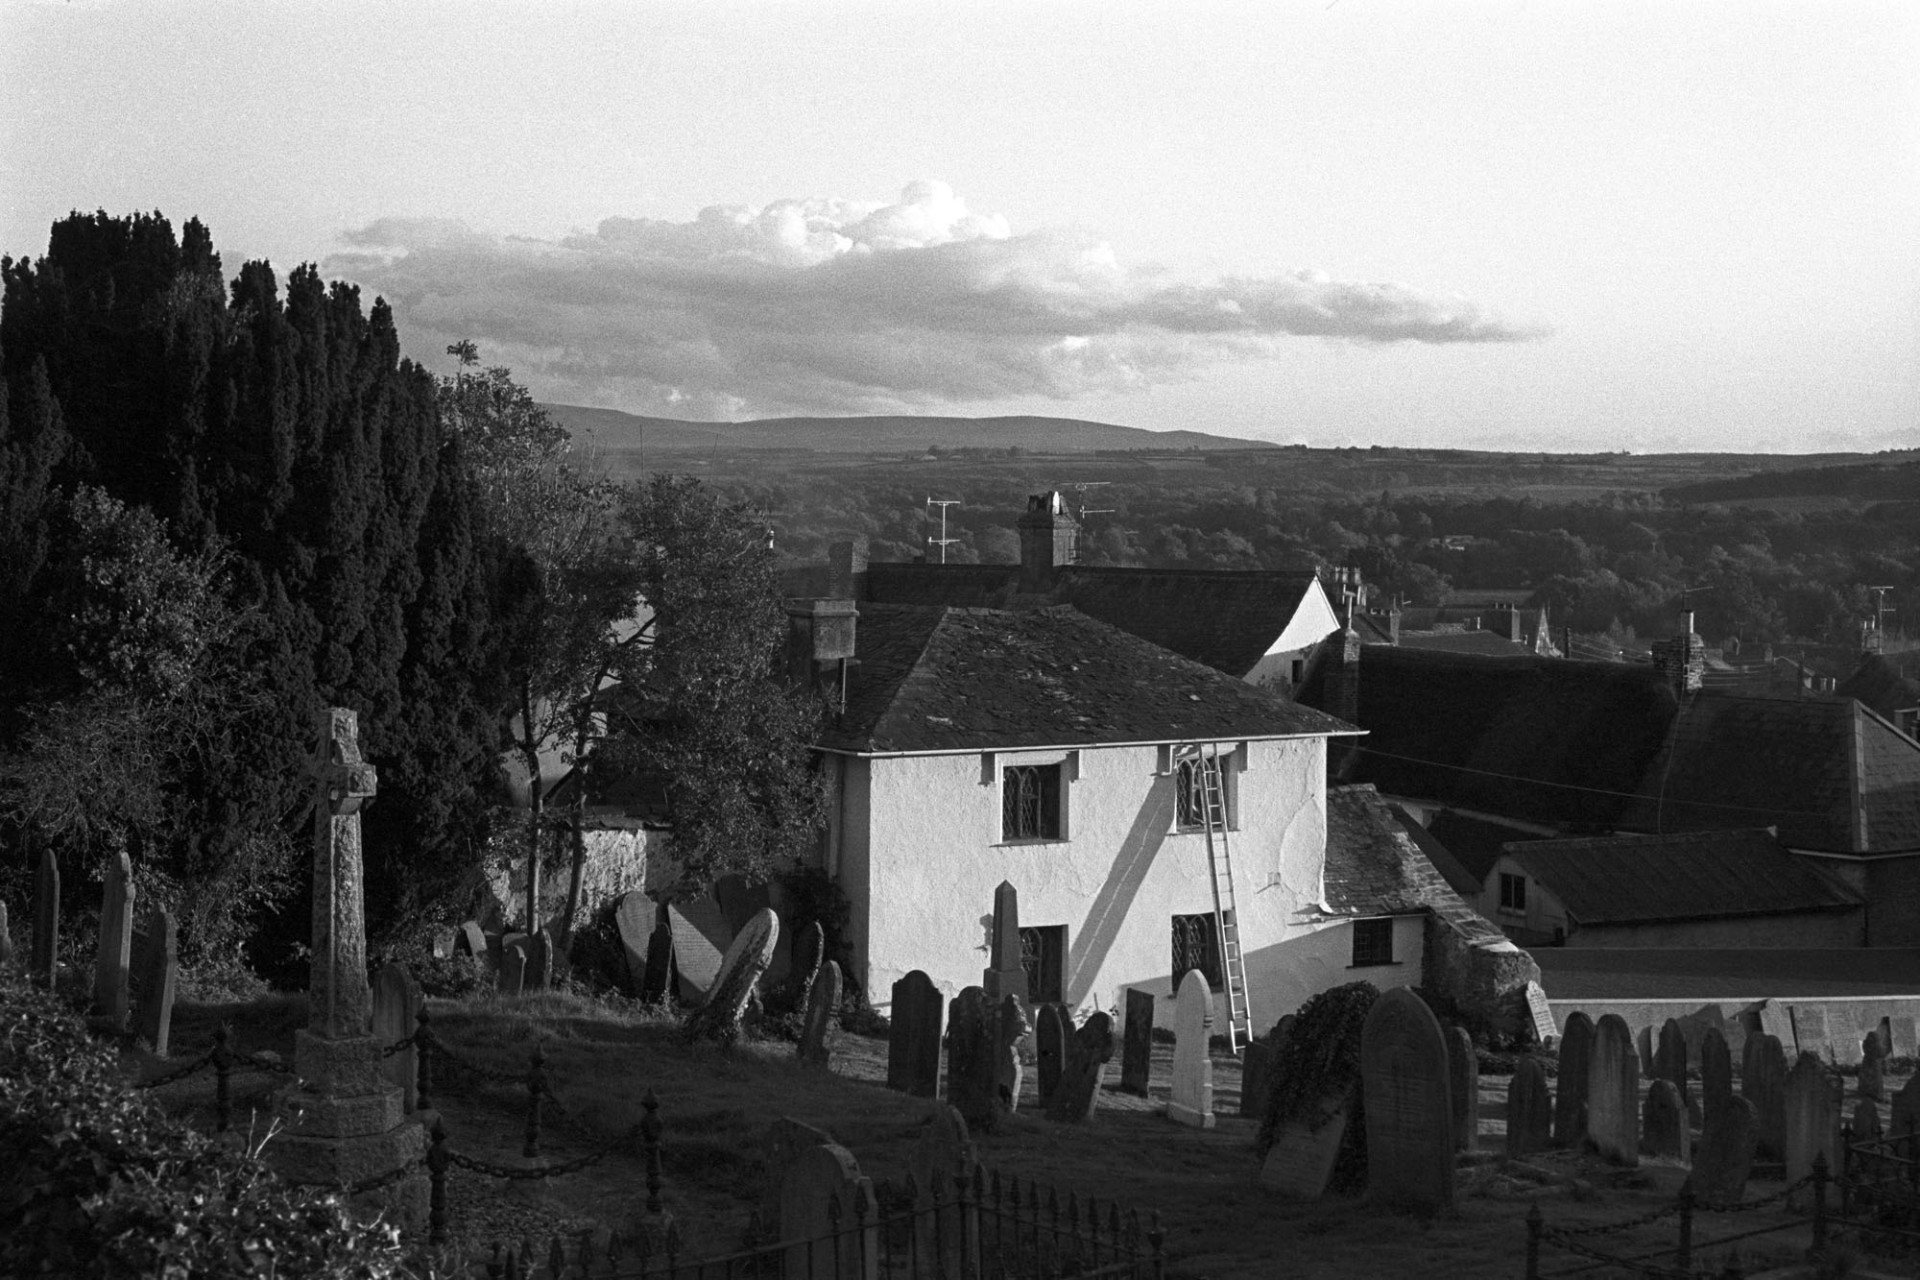 View over town towards Dartmoor, evening.
[Hatherleigh churchyard with gravestones, overlooking houses and a tree covered  landscape in the distance.]